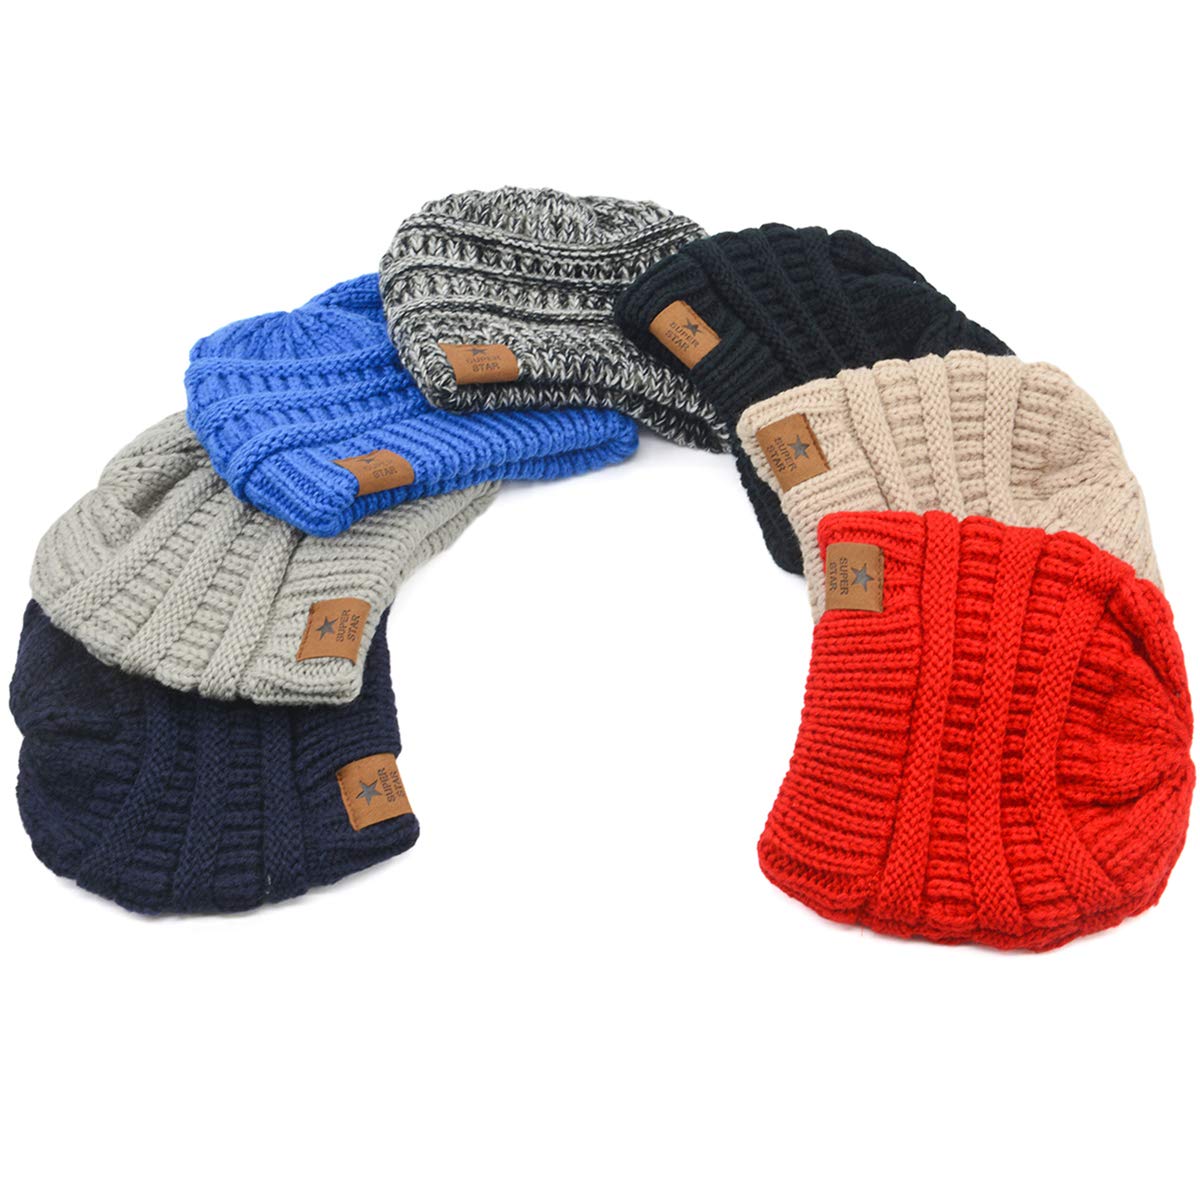 Zando Baby Beanies Infant Toddler Winter Hat Soft Warm Knit Hats Caps for Boys